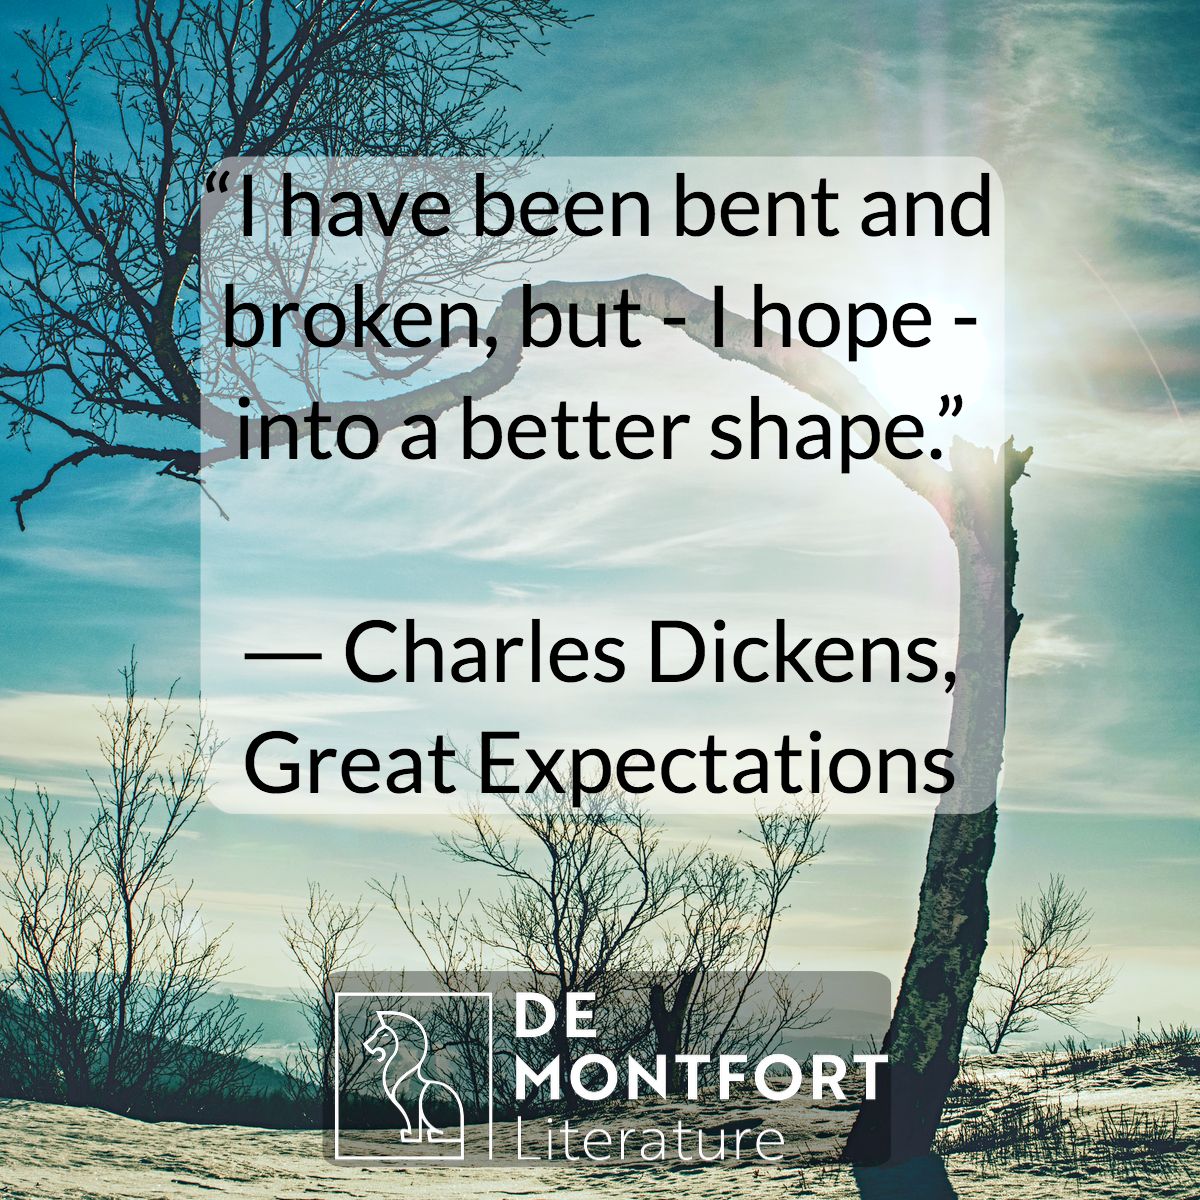 Wise words from Charles Dickens. Remember, you don't have to take this journey alone.

#PositiveMentalAttitude #PositiveVibes #writerscommunity #writer #author #ChangeTheGame #changeyourfuture #quote #mentalhealth